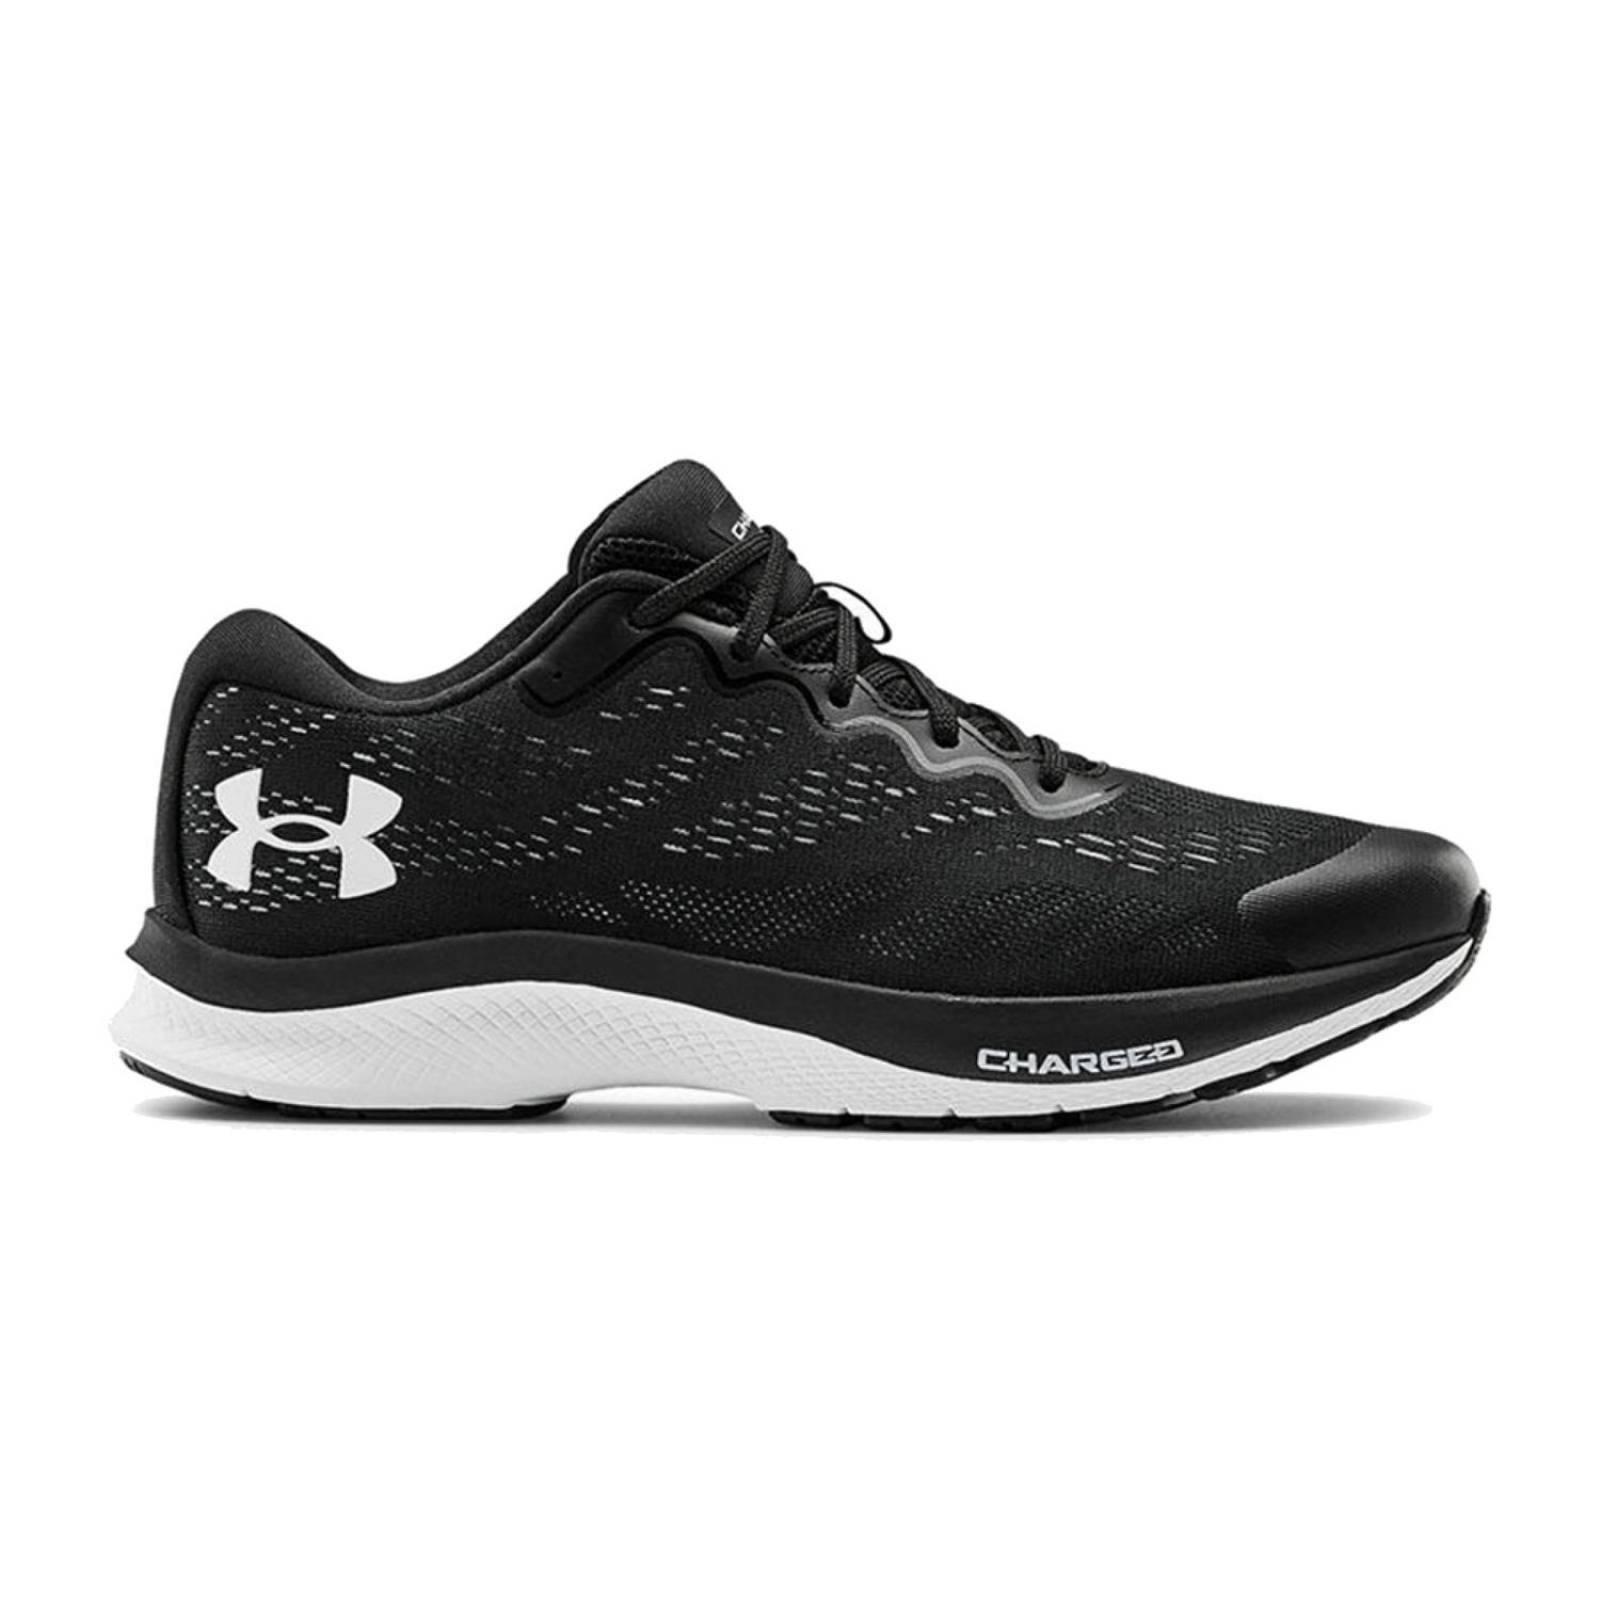 Tenis Under Armour Charged Bandit 6 Mujer Deportivo Correr 